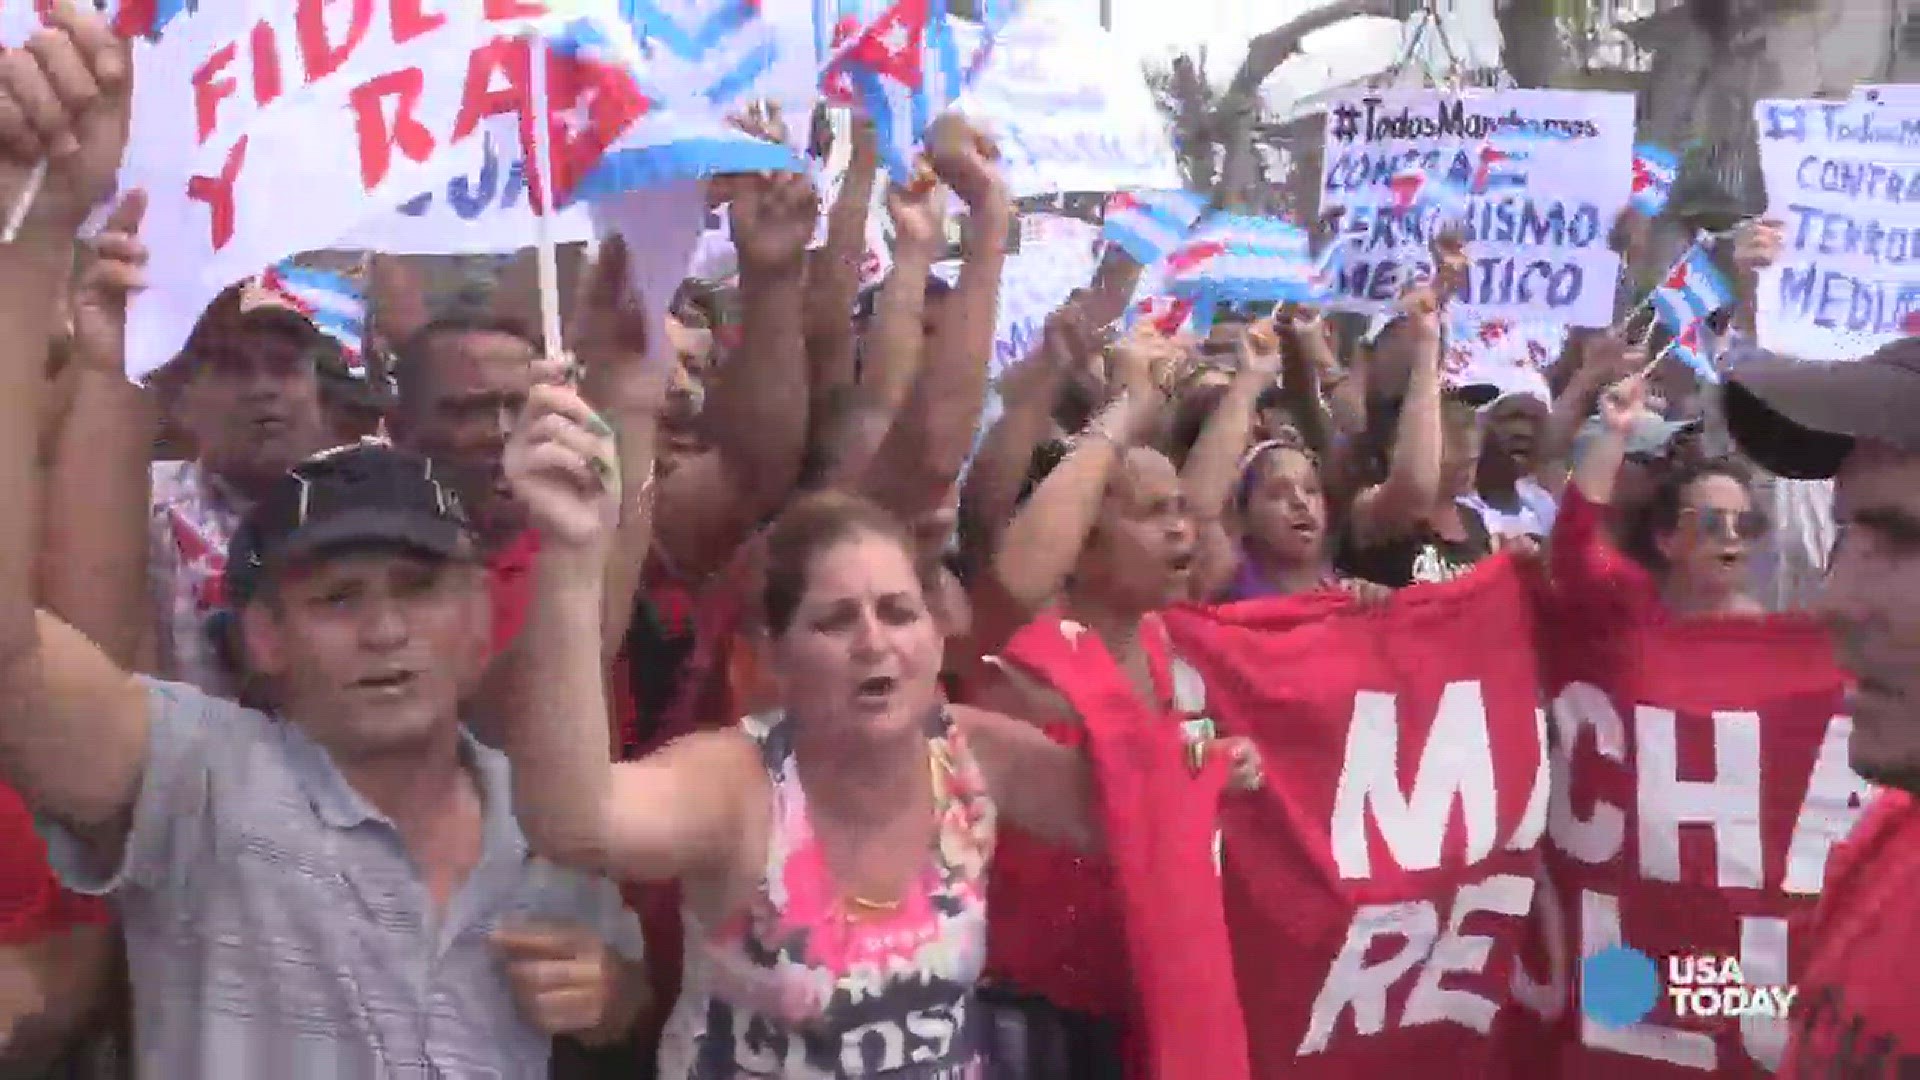 Just hours before President Obama was scheduled to land in Cuba on Sunday for his historic visit to the communist island, Cuban authorities arrested more than 50 dissidents who were marching to demand improved human rights.